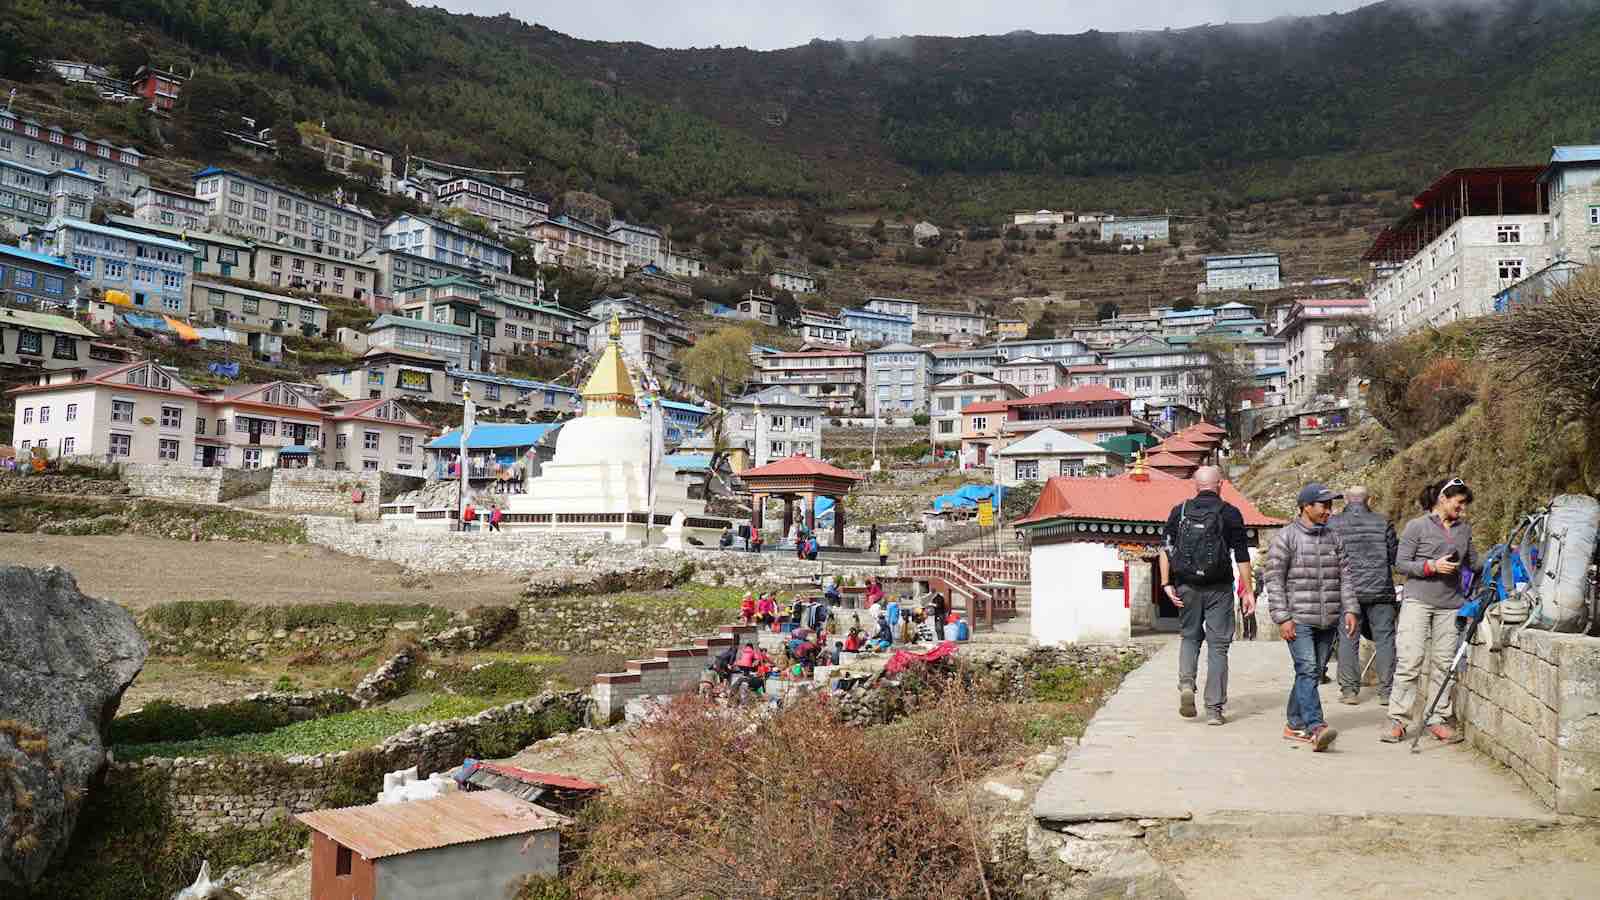 Namche: a pretty decently sized town carved right into the side of a mountain